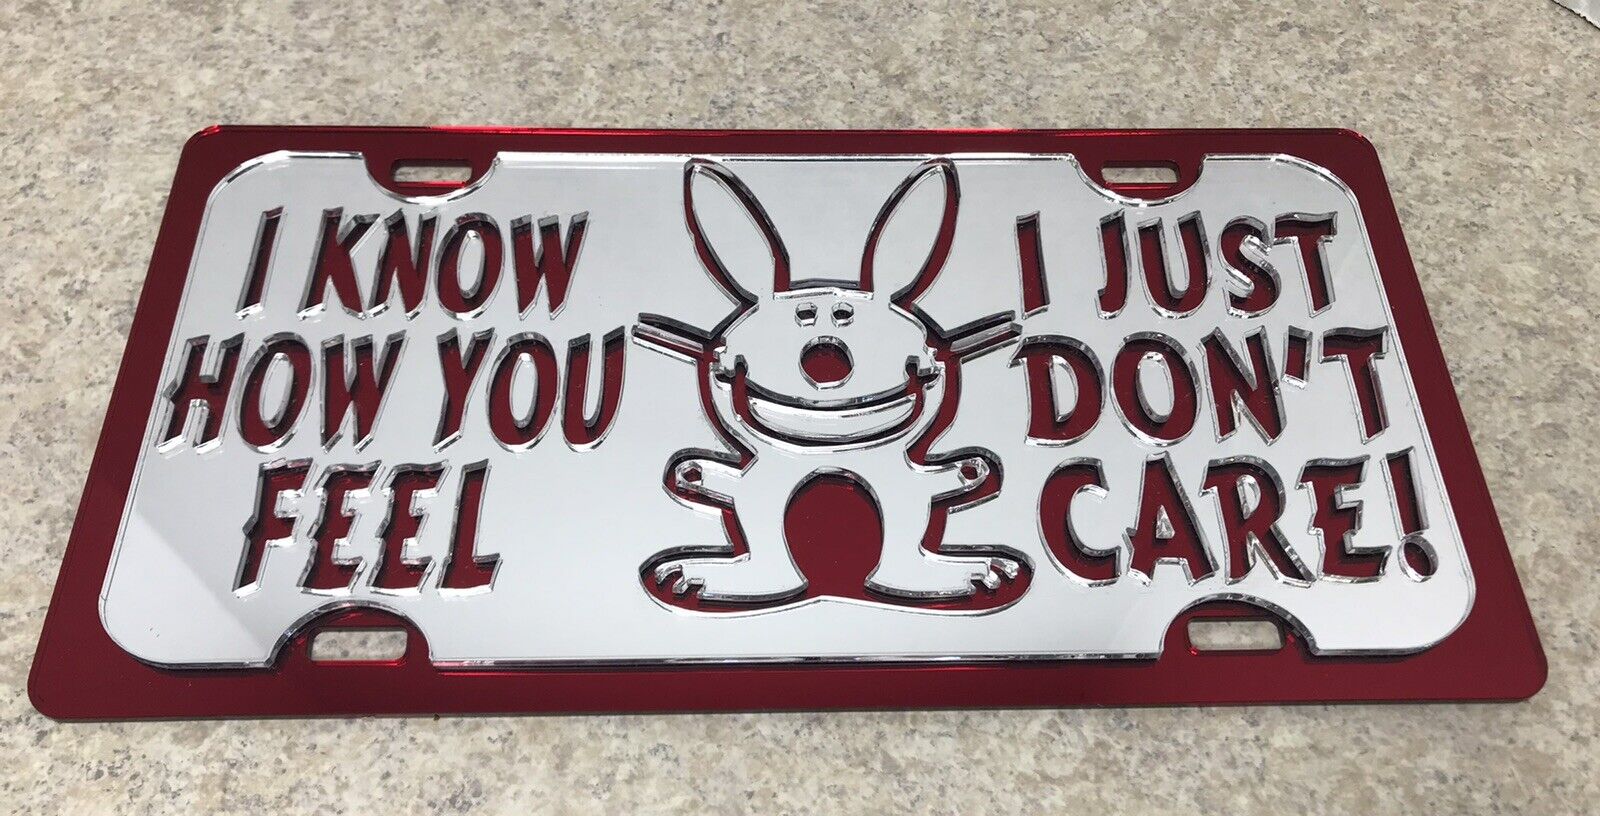 Vintage Red & White Mirrored License Plate